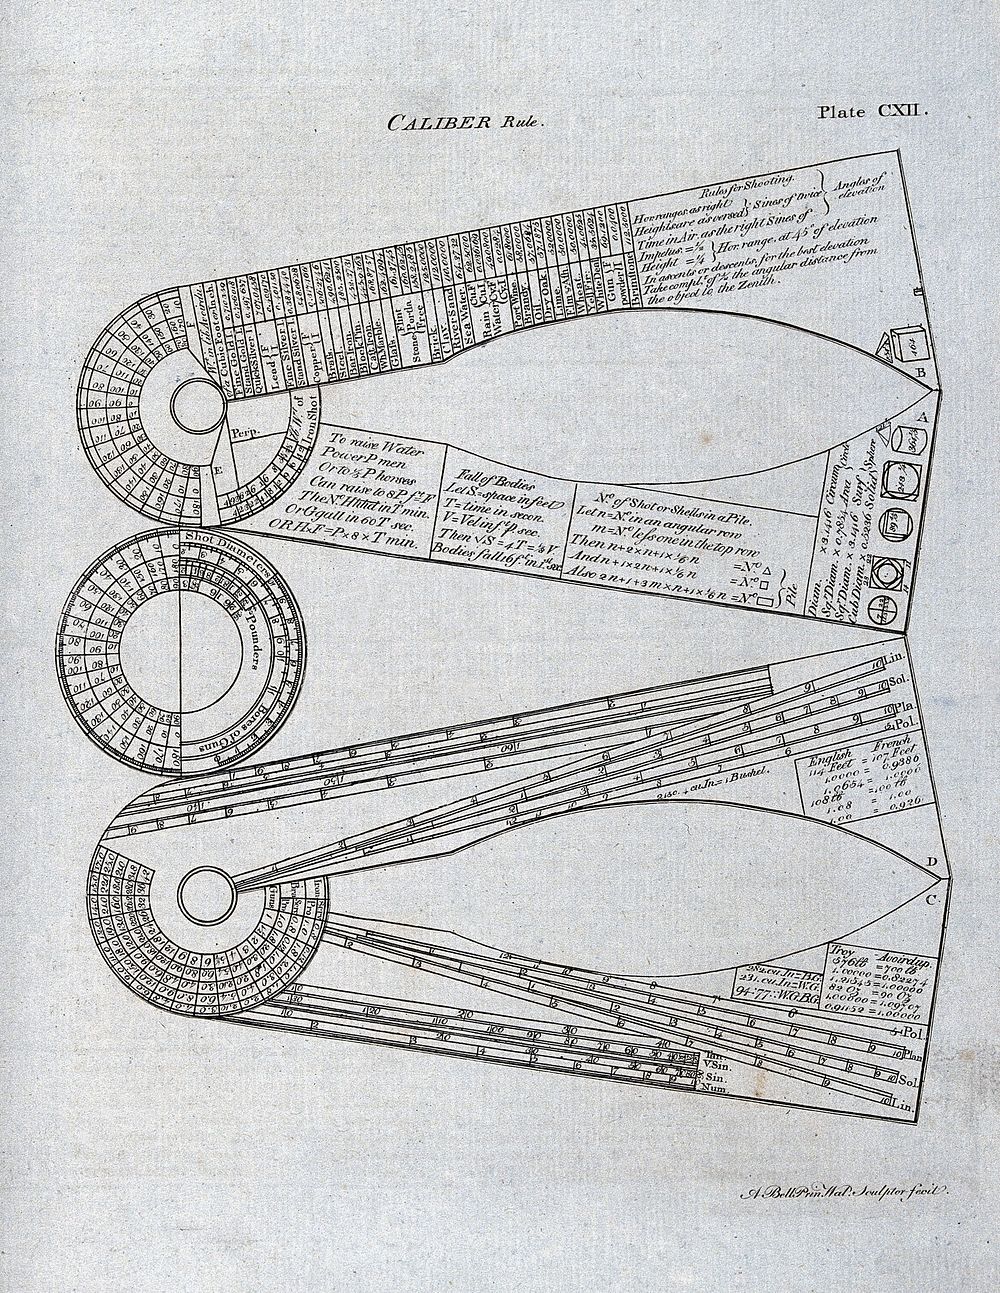 Calipers for artillery measurement, with many formulae engraved on them. Engraving by A. Bell.